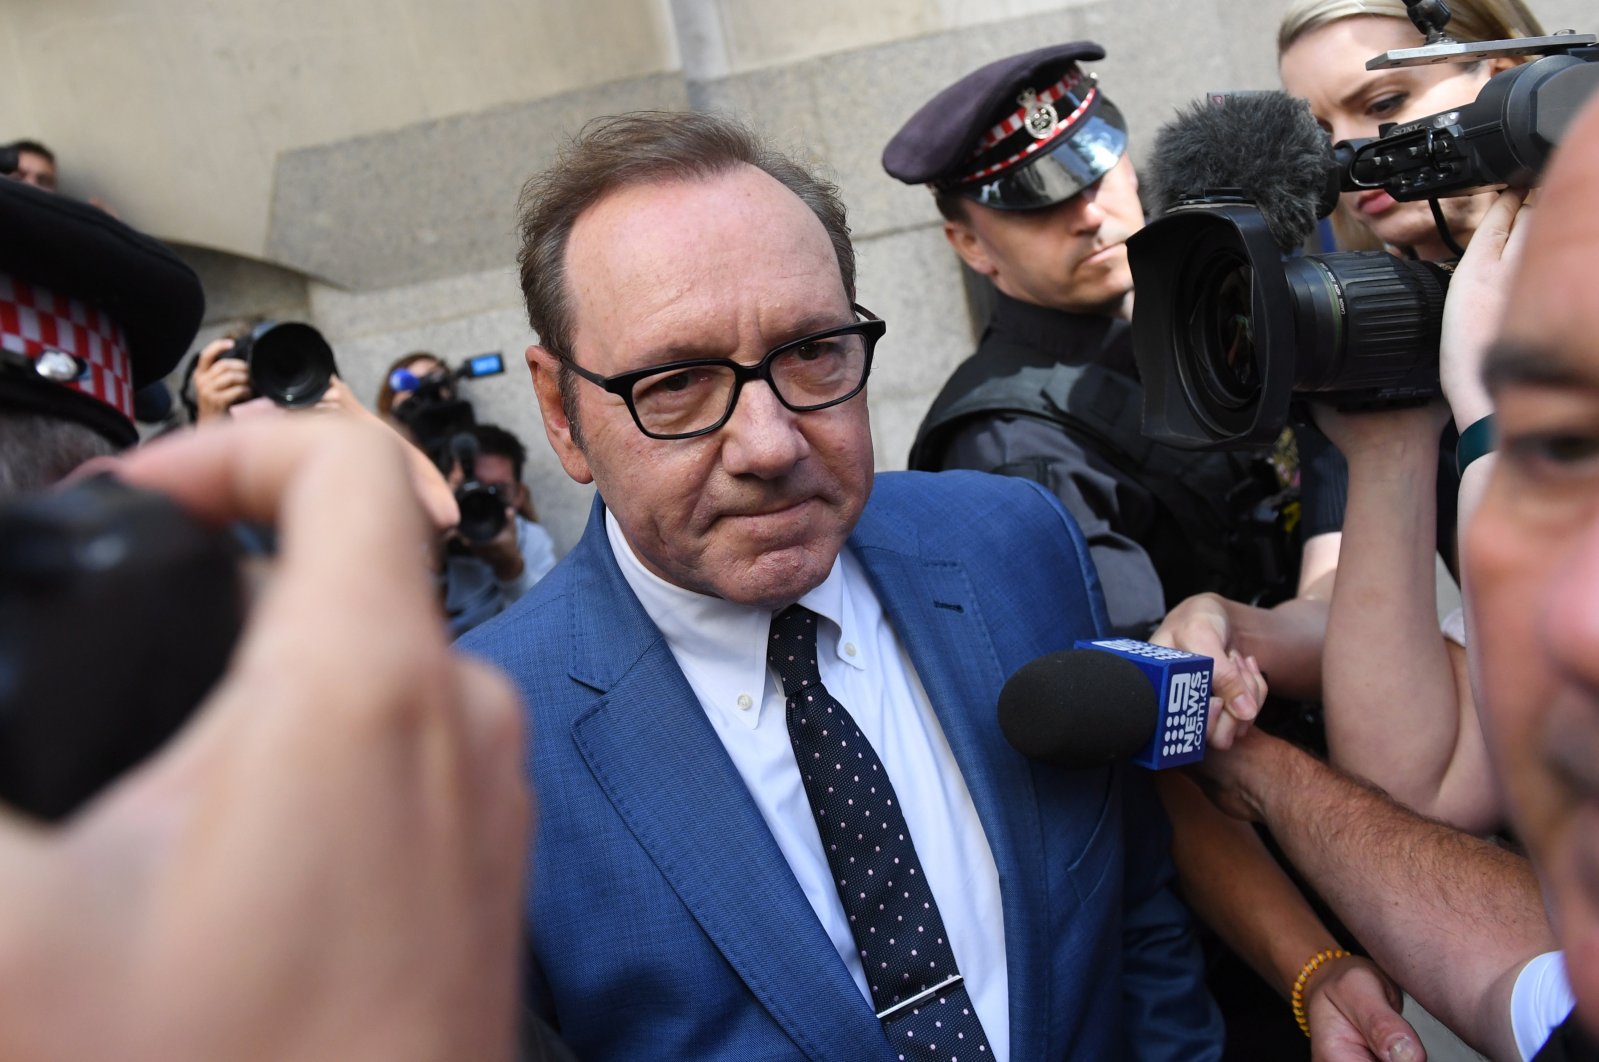 Actor Kevin Spacey leaves the Central Criminal Court, known as the Old Bailey, in London, Britain, July 14, 2022. (EPA Photo)